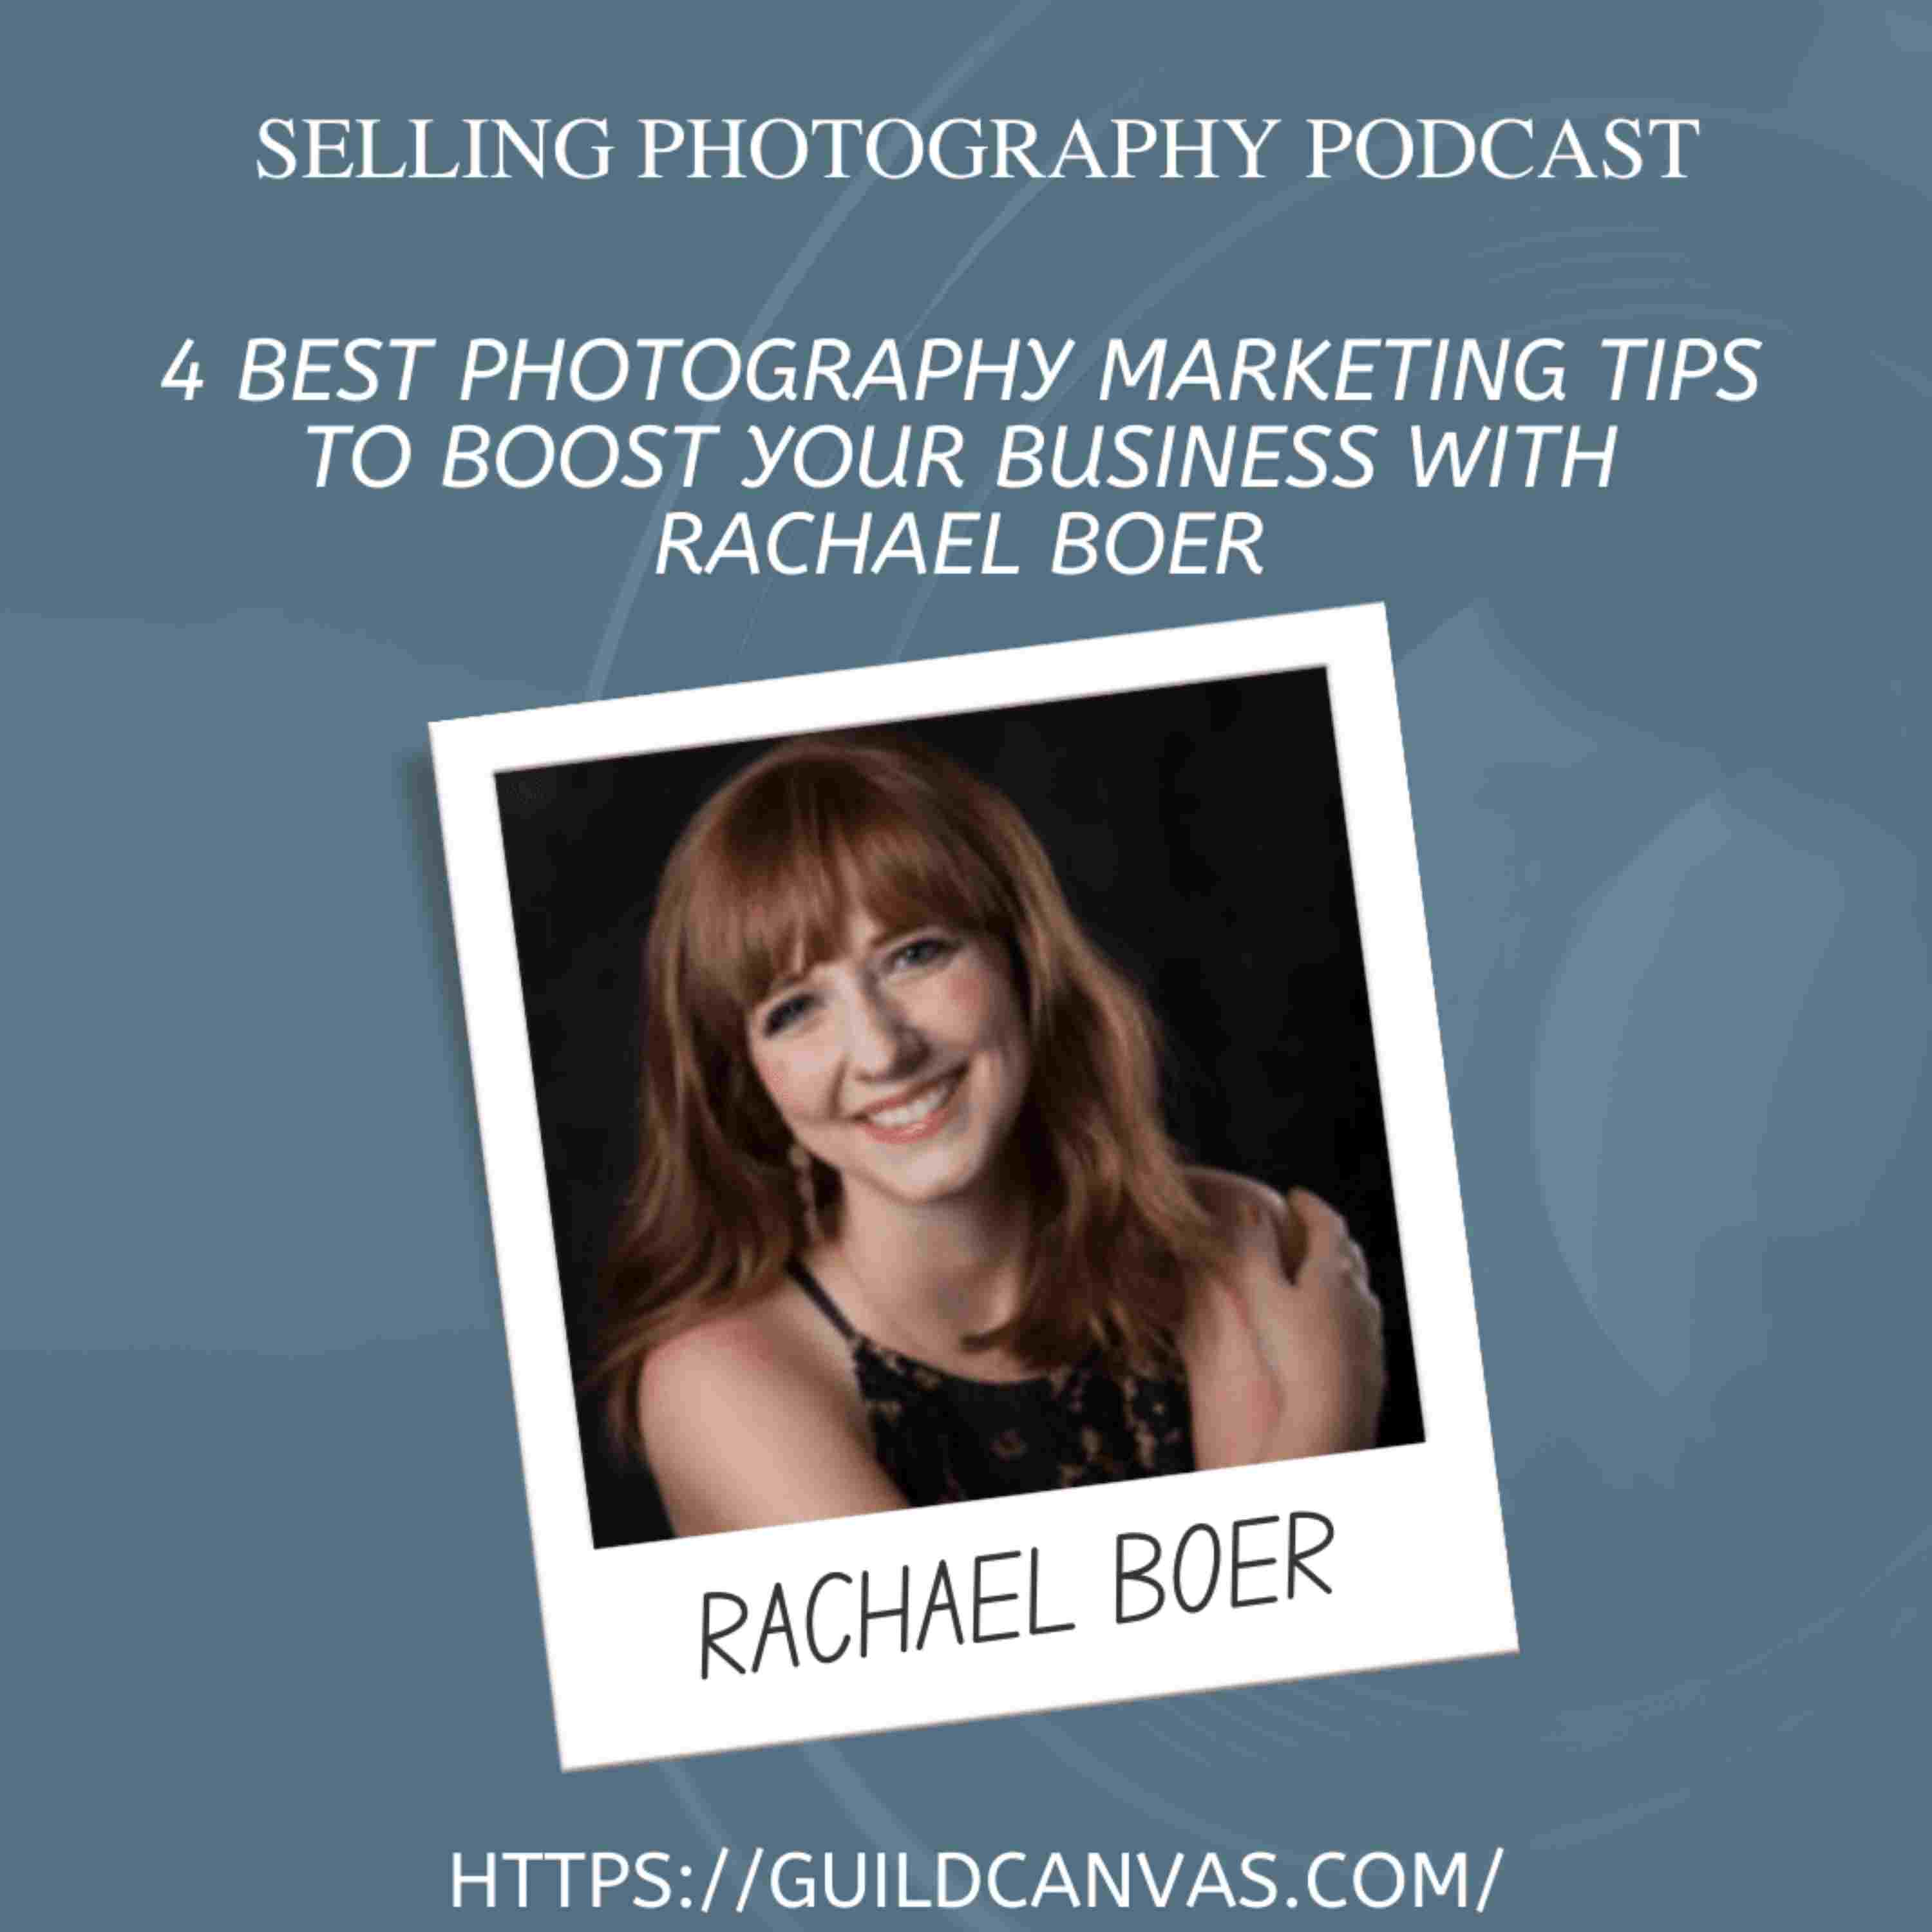 4 Best Photography Marketing Tips to Boost Your Business with Rachael Boer